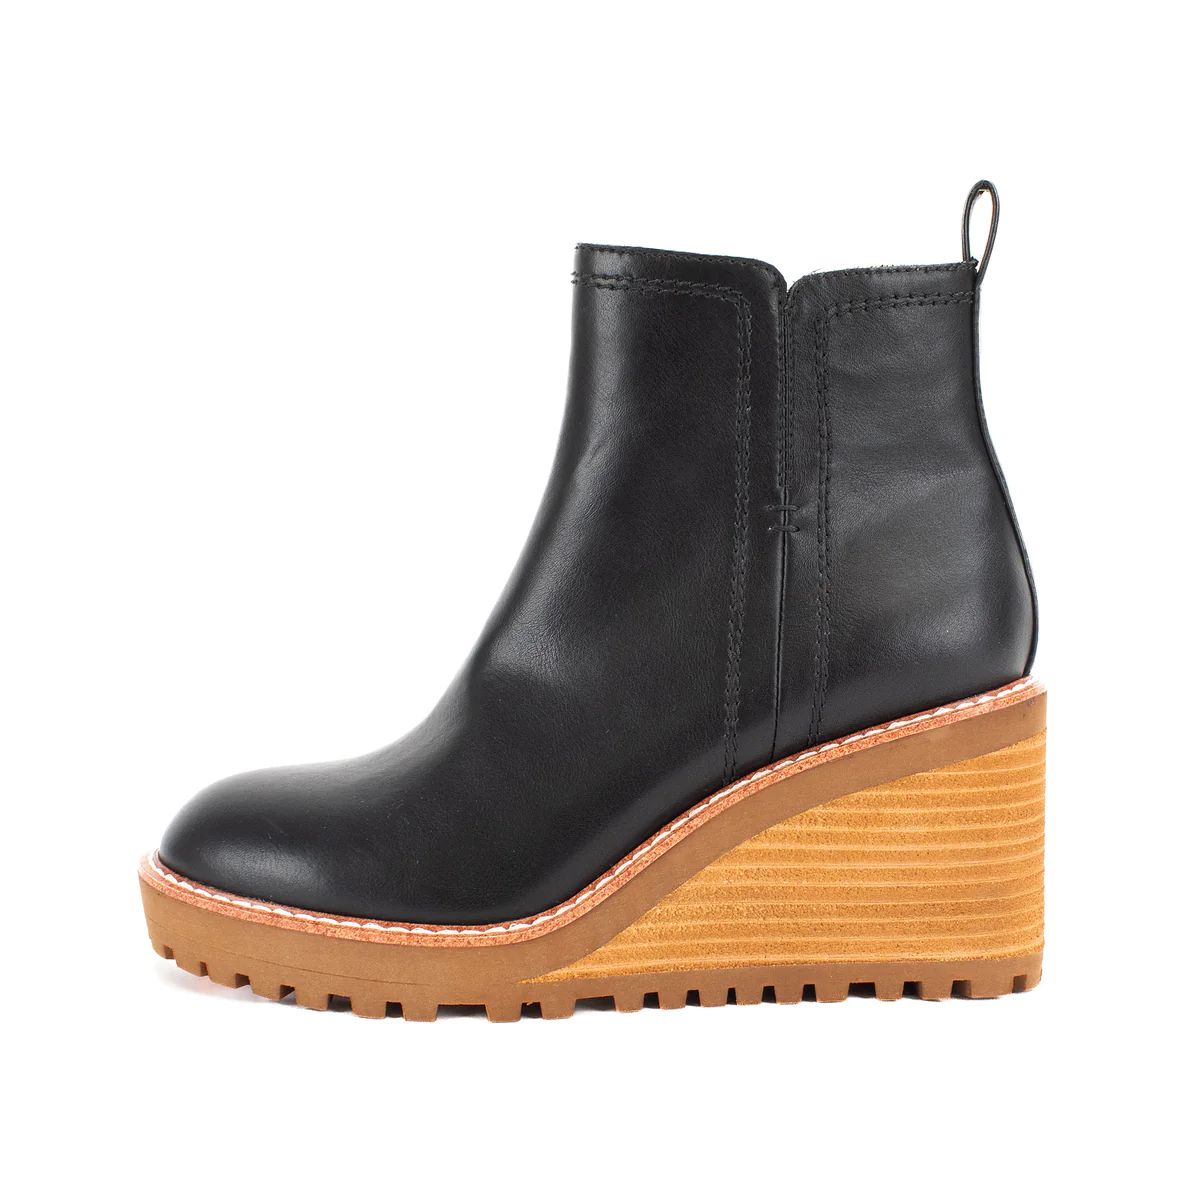 Arten Wedge Ankle Boot | Yellow Box Official Site | Yellow Box